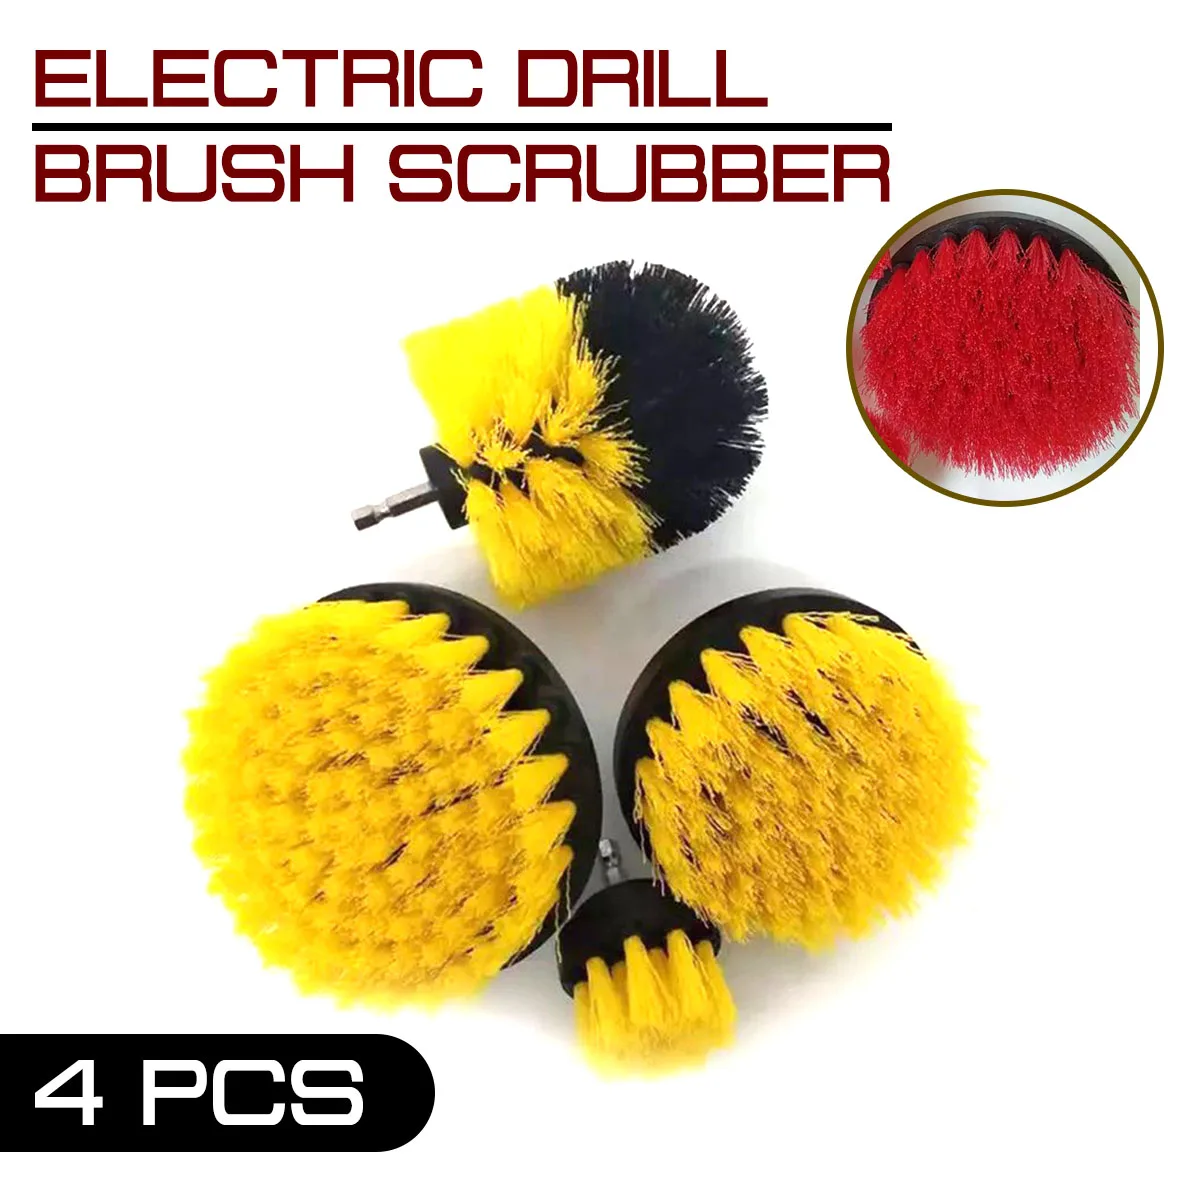 

4 Pcs/Set Electric Drill Brush Power Scrubber Brush Drill Clean for Shower Tub Tile Scrub Grout Bathroom Surfaces Cleaning Tool